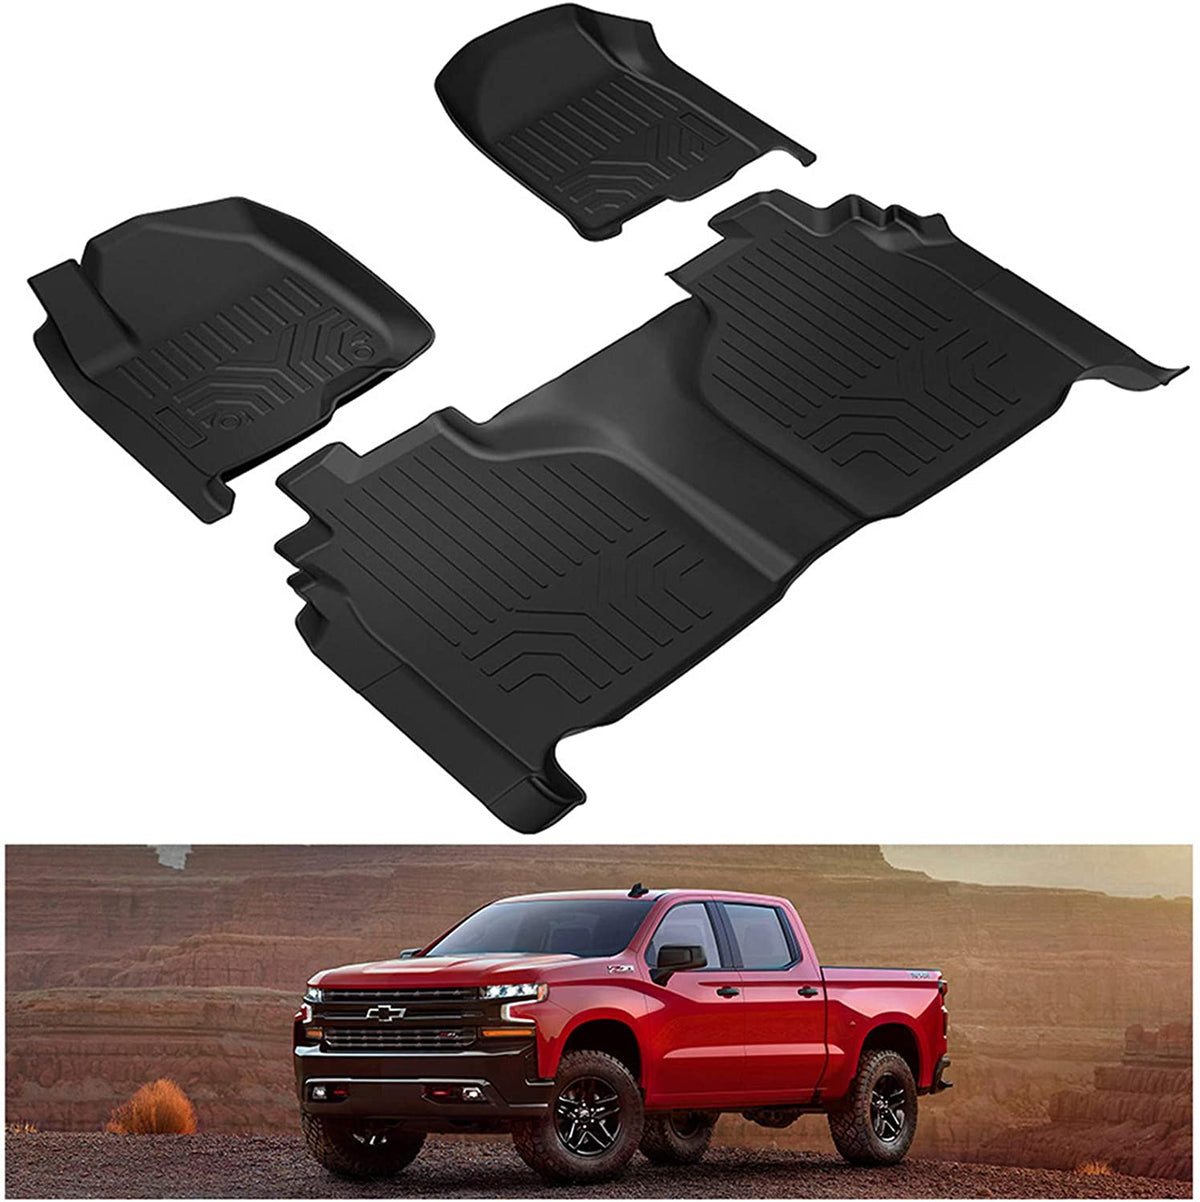 Kiwi Master Floor Mats Compatible for 2019-2022 Chevrolet Silverado / GMC Sierra 1500 Crew Cab with Carpeted Factory Storage Box All Weather Protector Mat Front Rear 2 Row Seat TPE Slush Liners Black